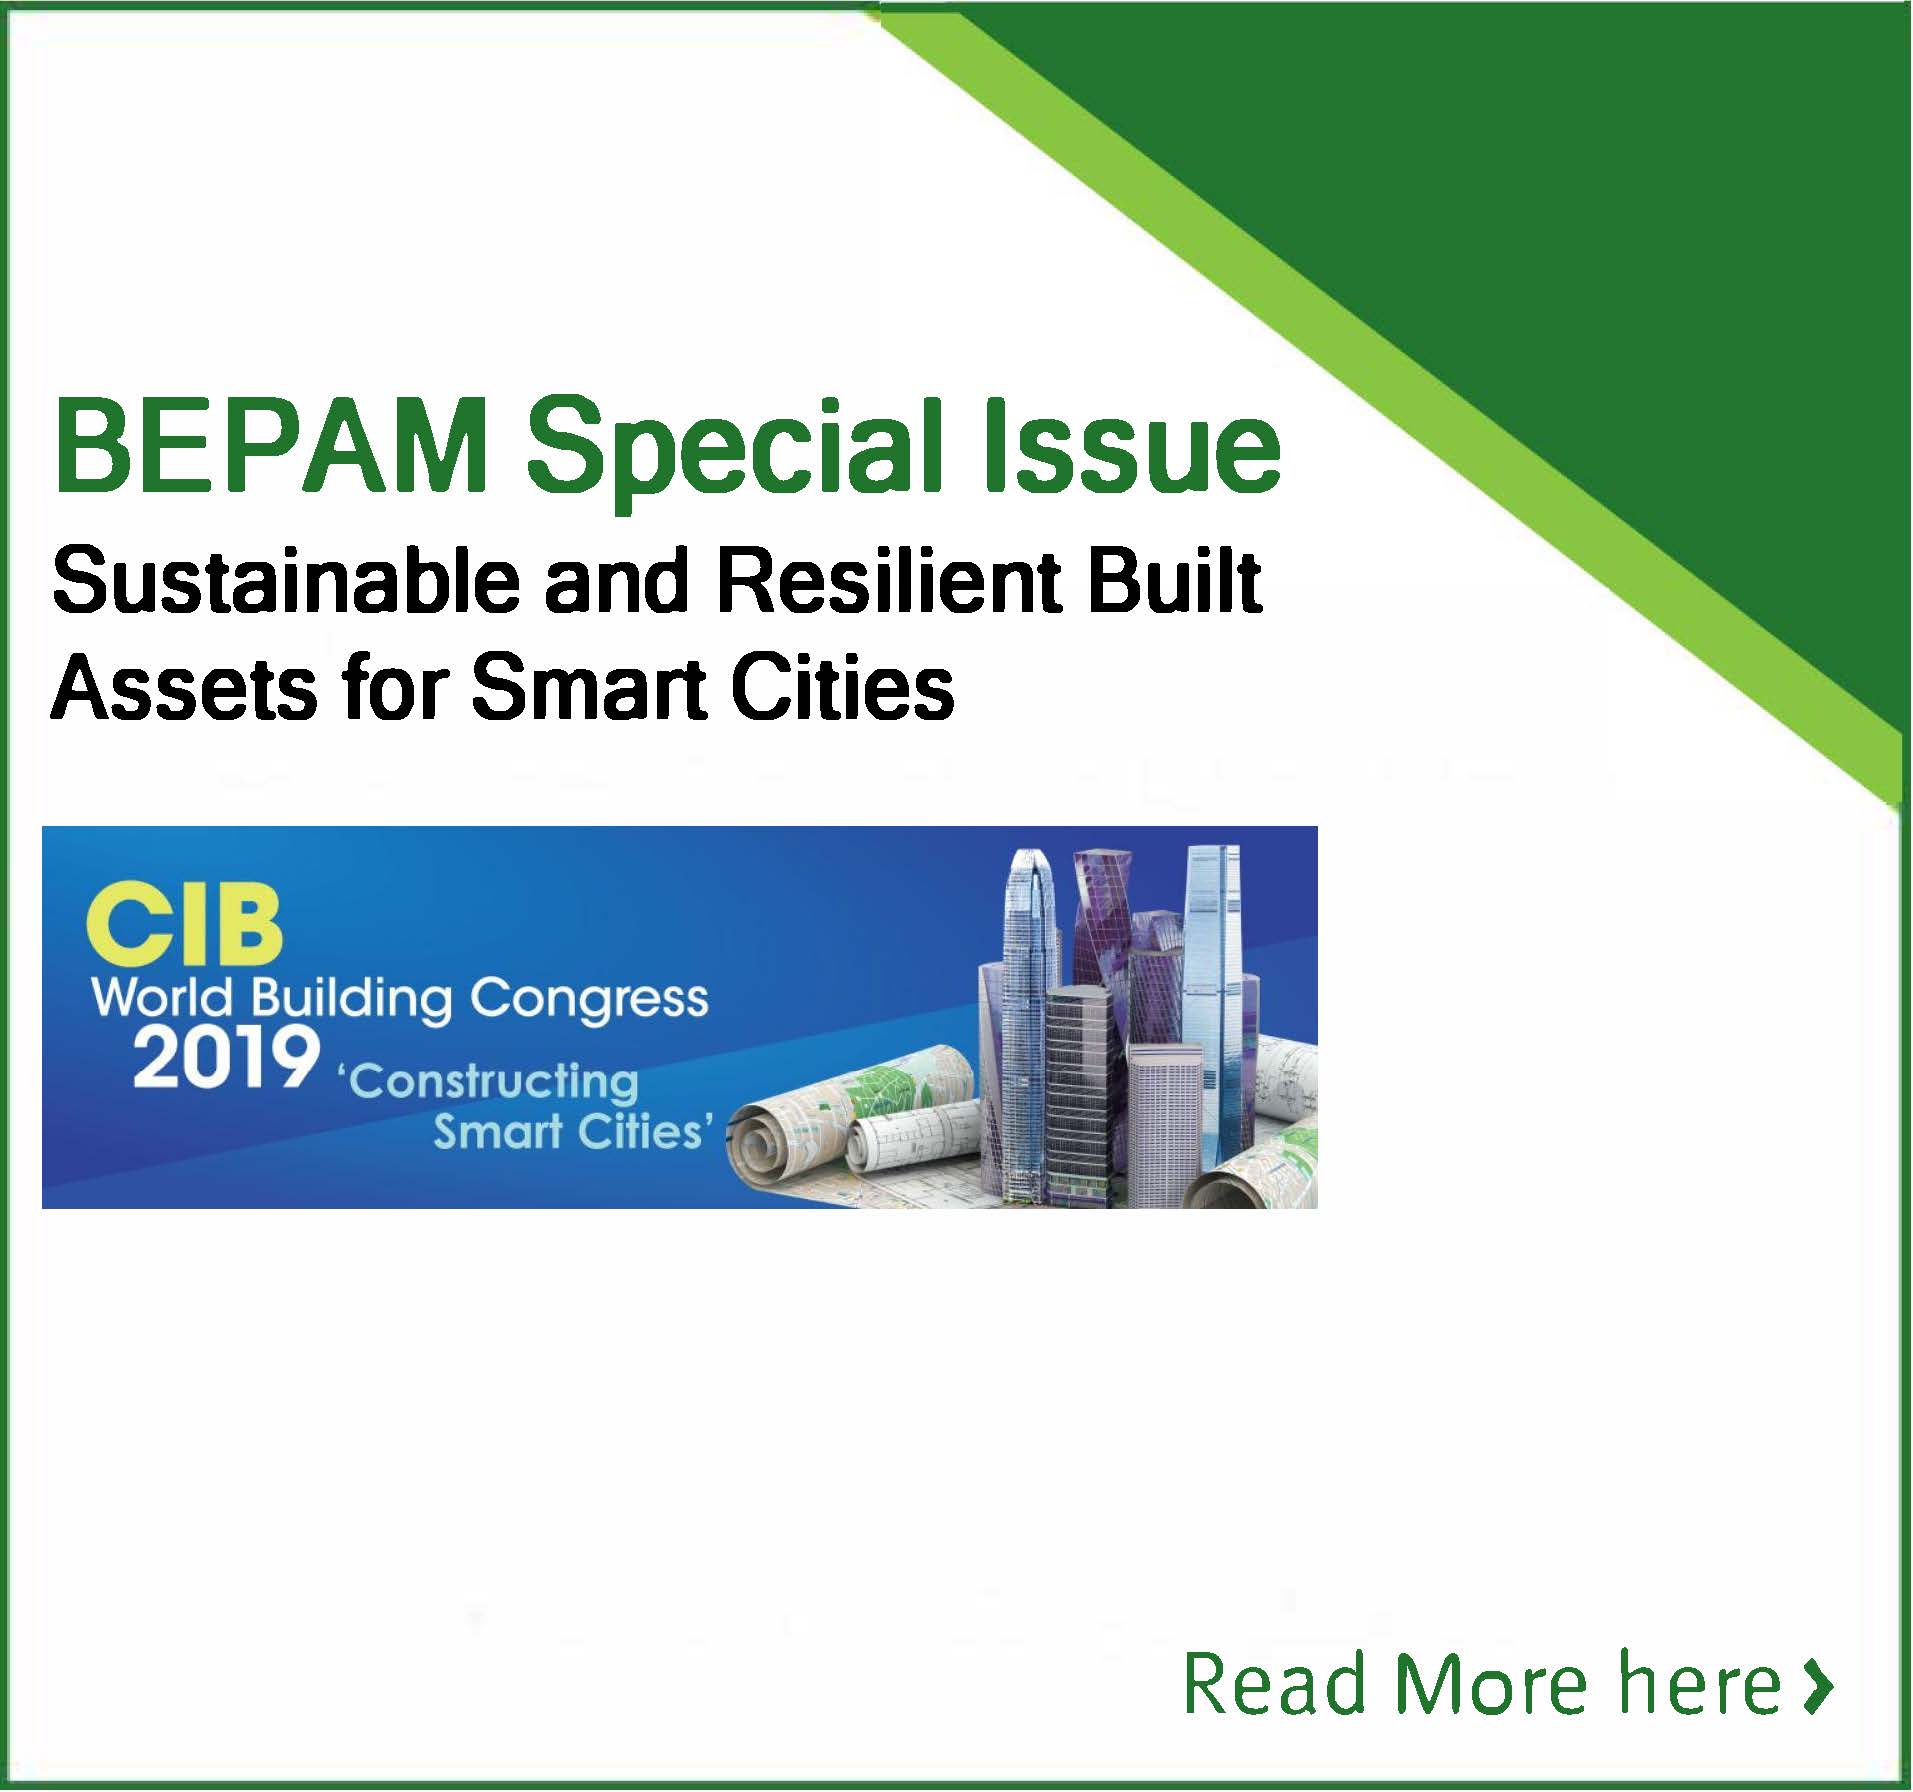 Vol. 11, Issue 3 of BEPAM (Built Environment Project and Asset Management) is now available online